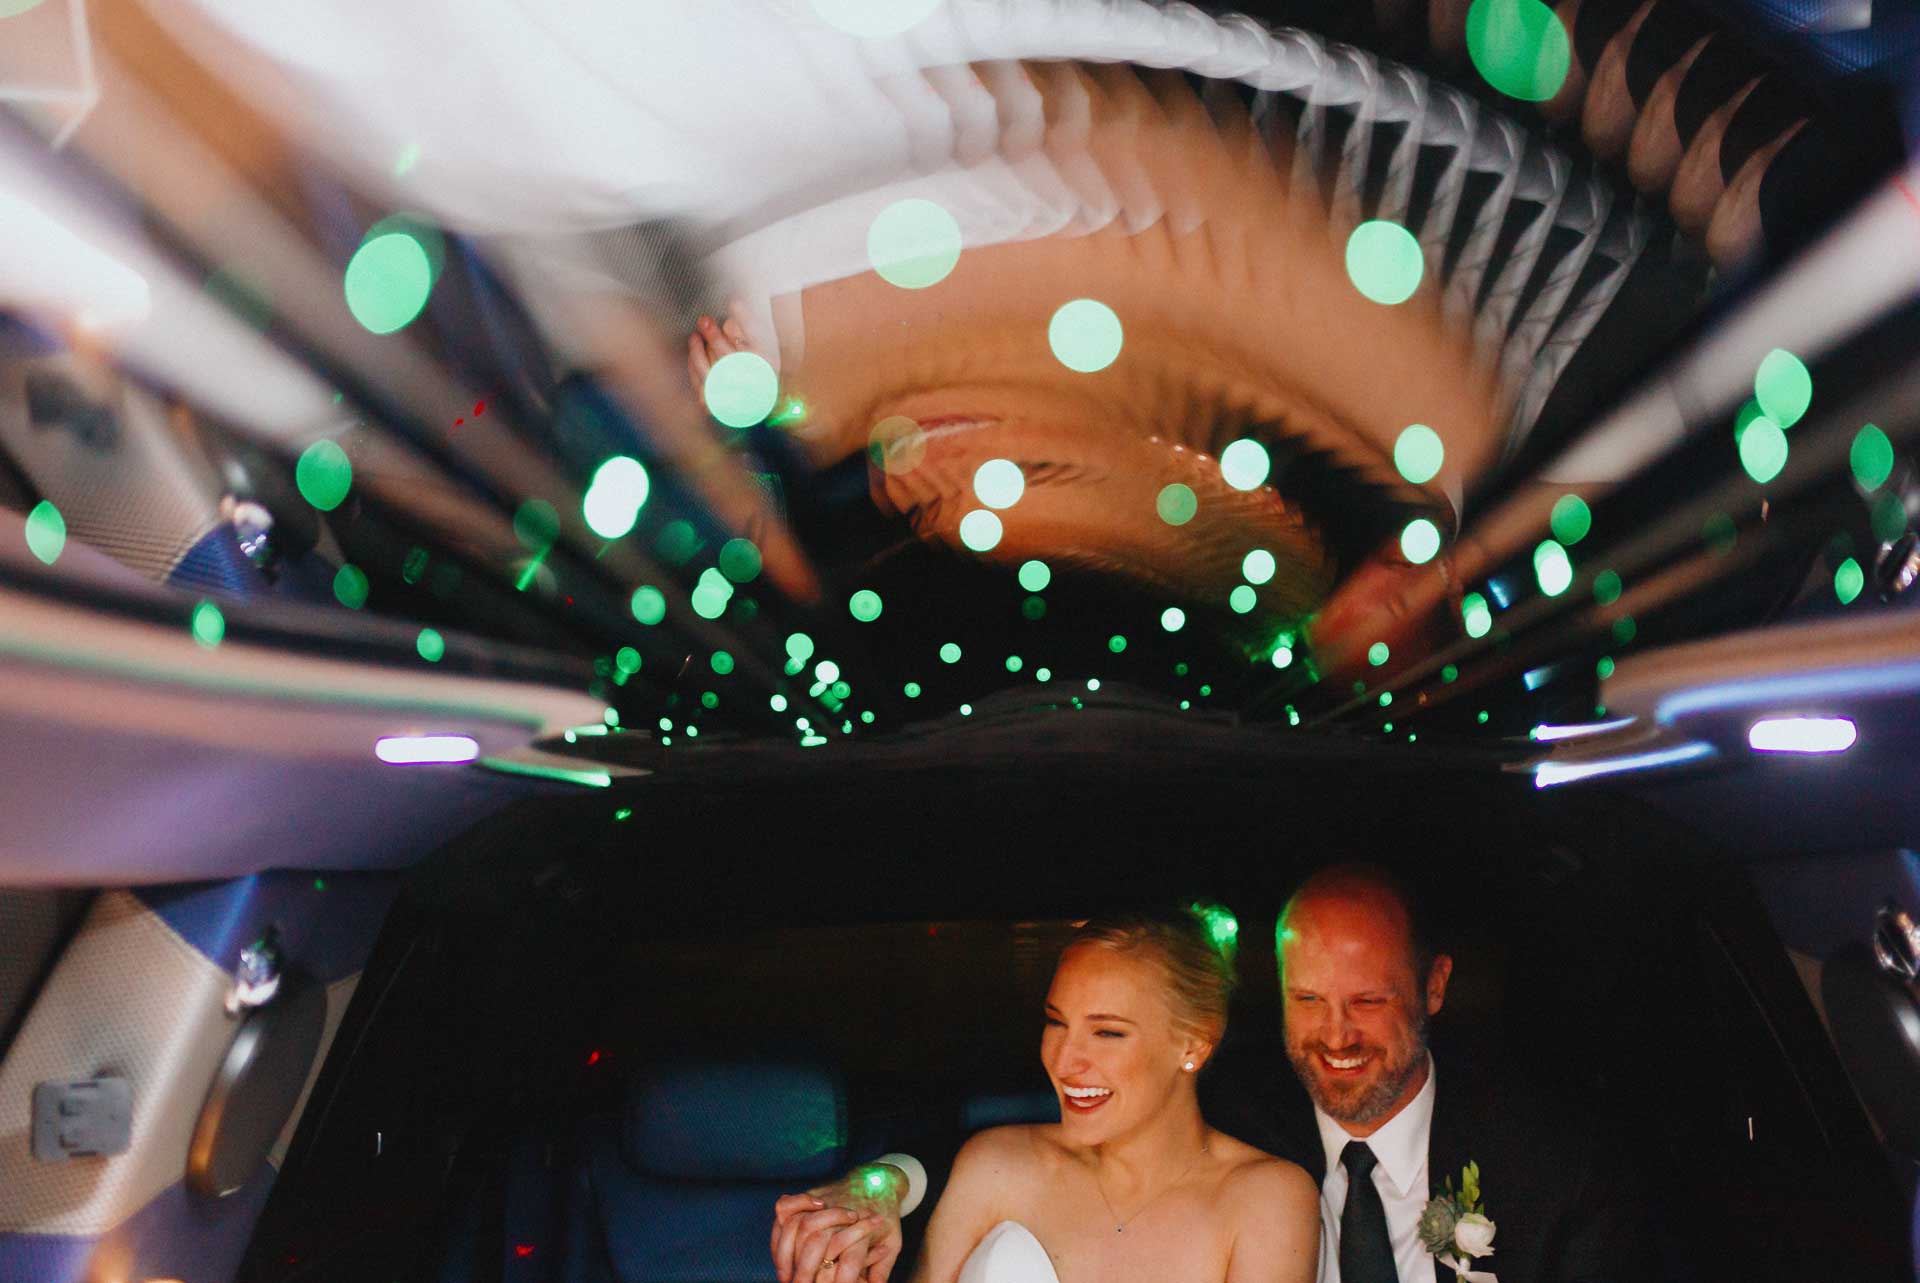 Couple Kelley and Erich share a funny moment inside a limo with green sparkling lights Houston Texas en route to Brennan's of Houston, Texas